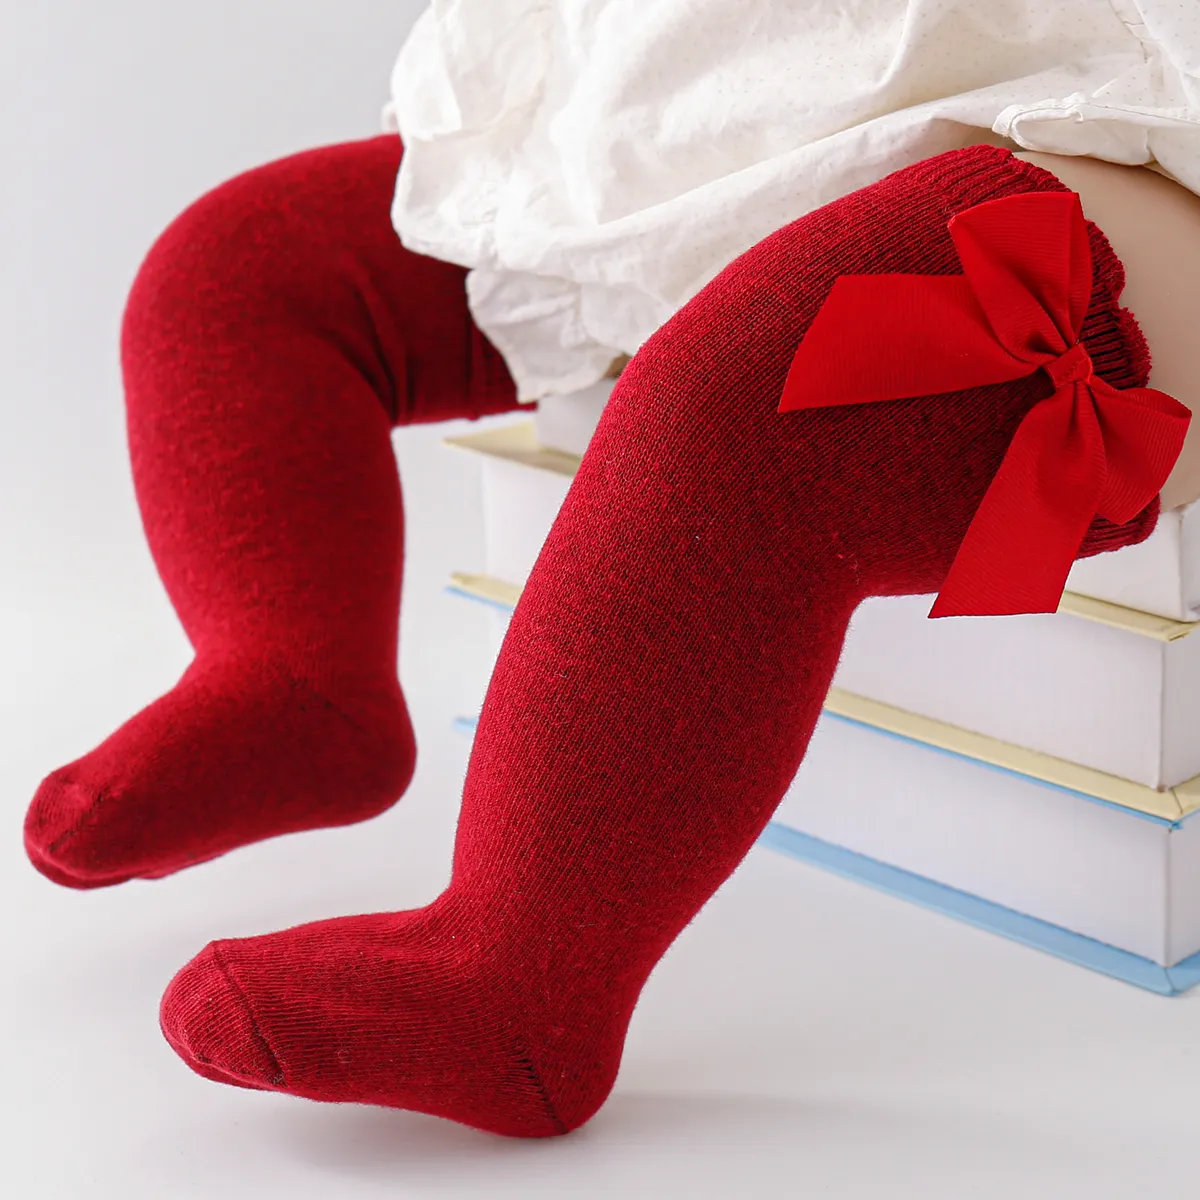 Bow mid-calf socks available in 6 colors for Baby/toddler   big image 1